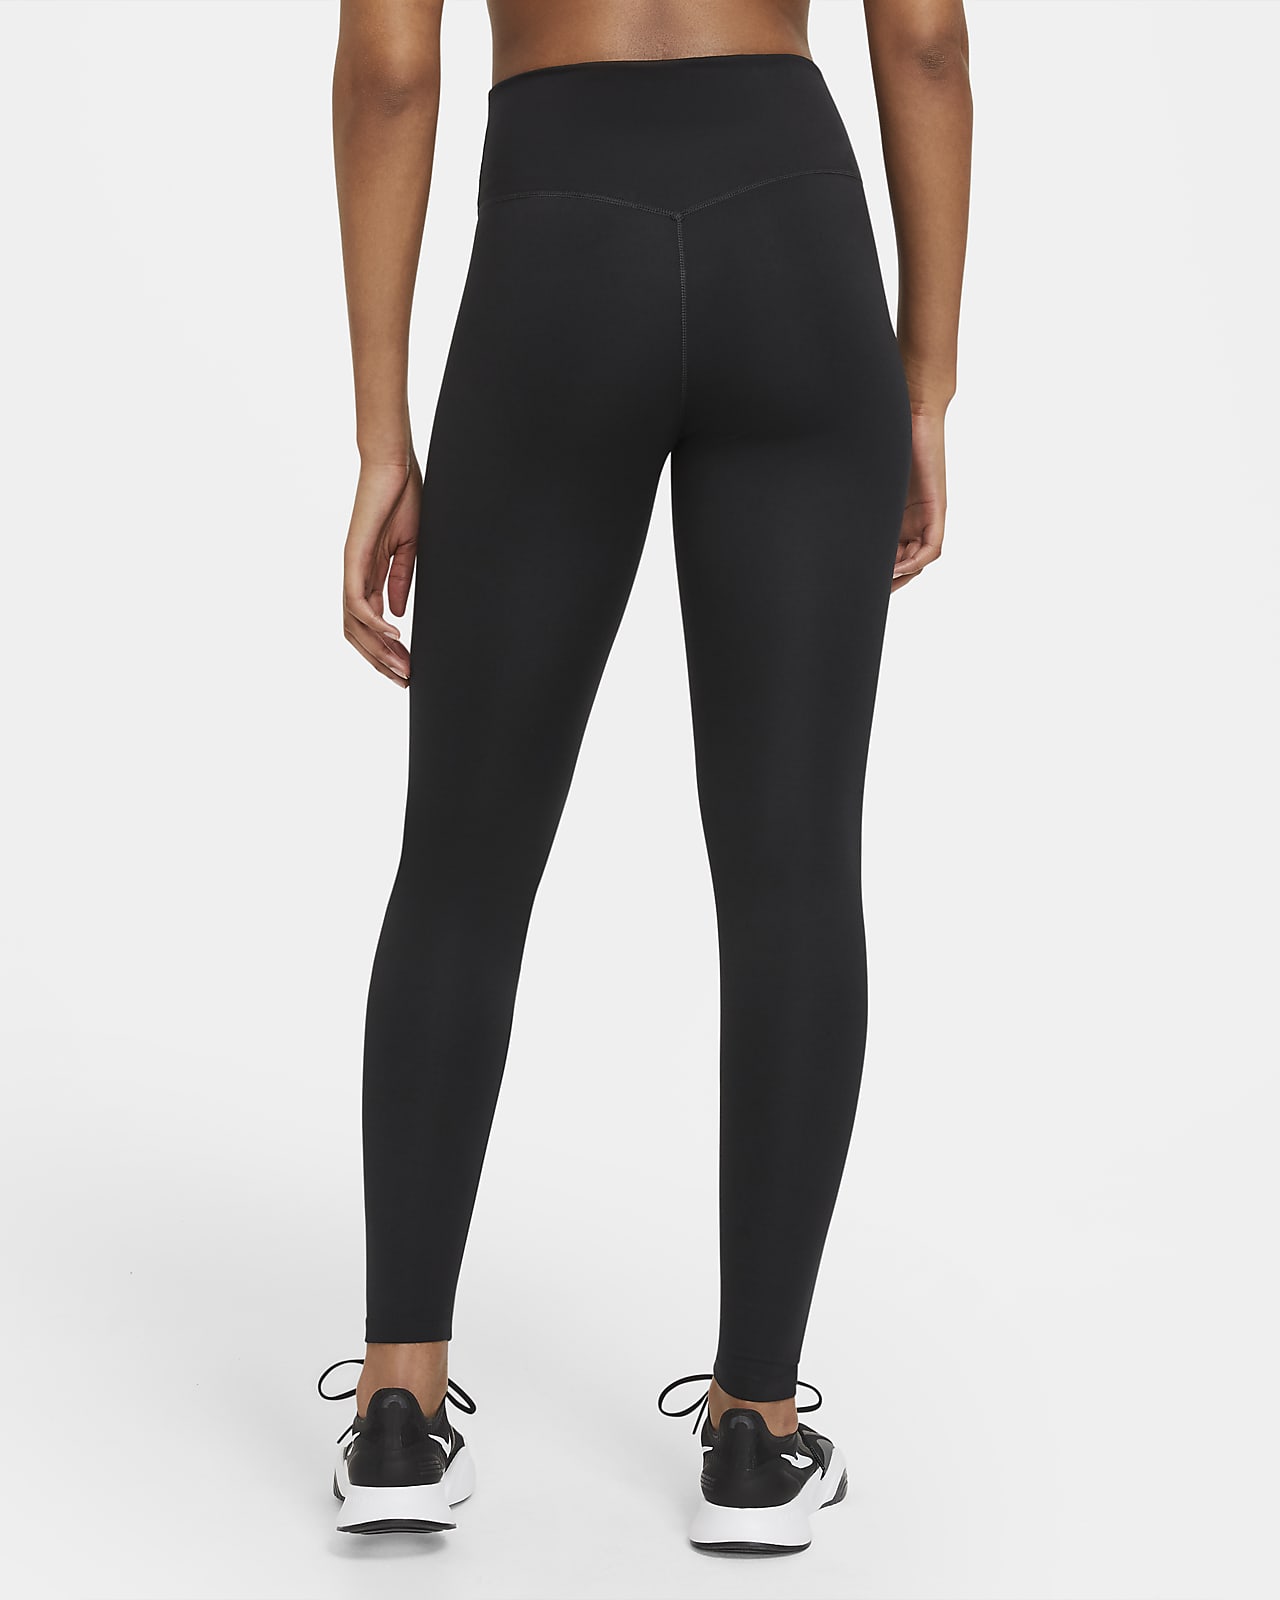 https://static.nike.com/a/images/t_PDP_1280_v1/f_auto,q_auto:eco/423b71df-ea91-45c5-b123-36c10d6f19fc/one-legging-met-halfhoge-taille-dames-VCXzqM.png